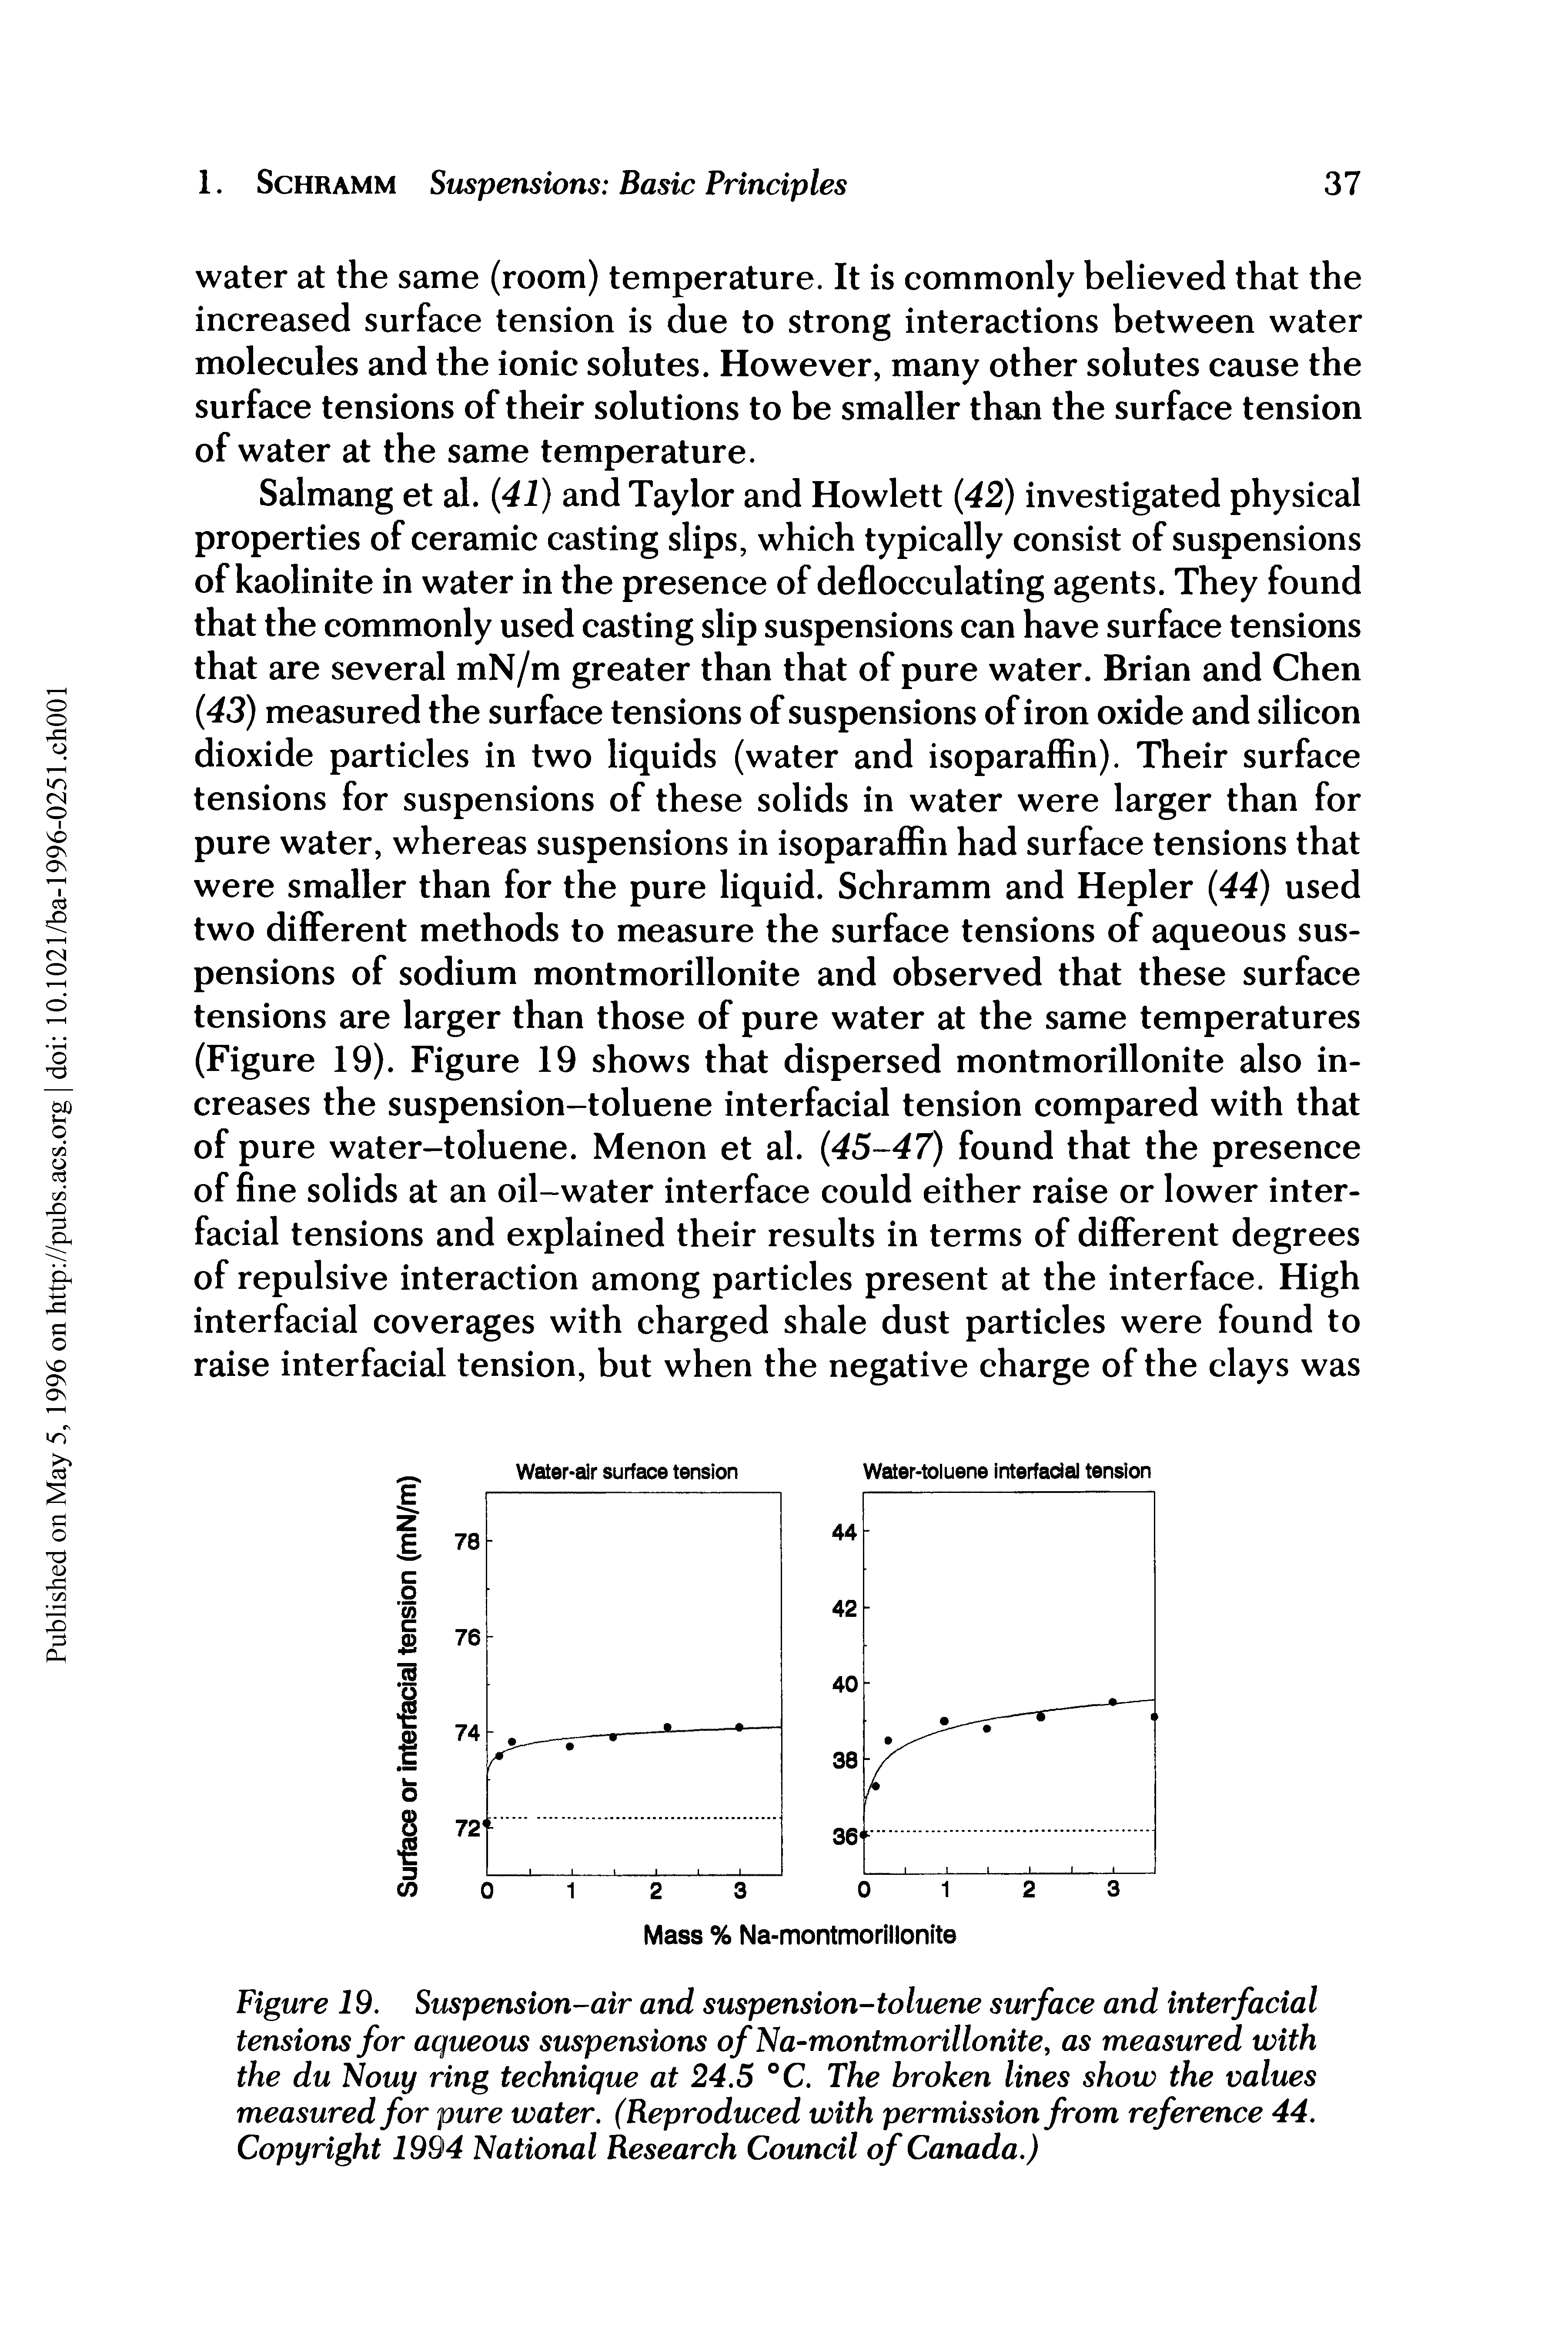 Figure 19. Suspension-air and suspension-toluene surface and interfacial tensions for aqueous suspensions of Na-montmorillonite, as measured with the du Nouy ring technique at 24.5 °C. The broken lines show the values measured for pure water. (Reproduced with permission from reference 44. Copyright 1994 National Research Council of Canada.)...